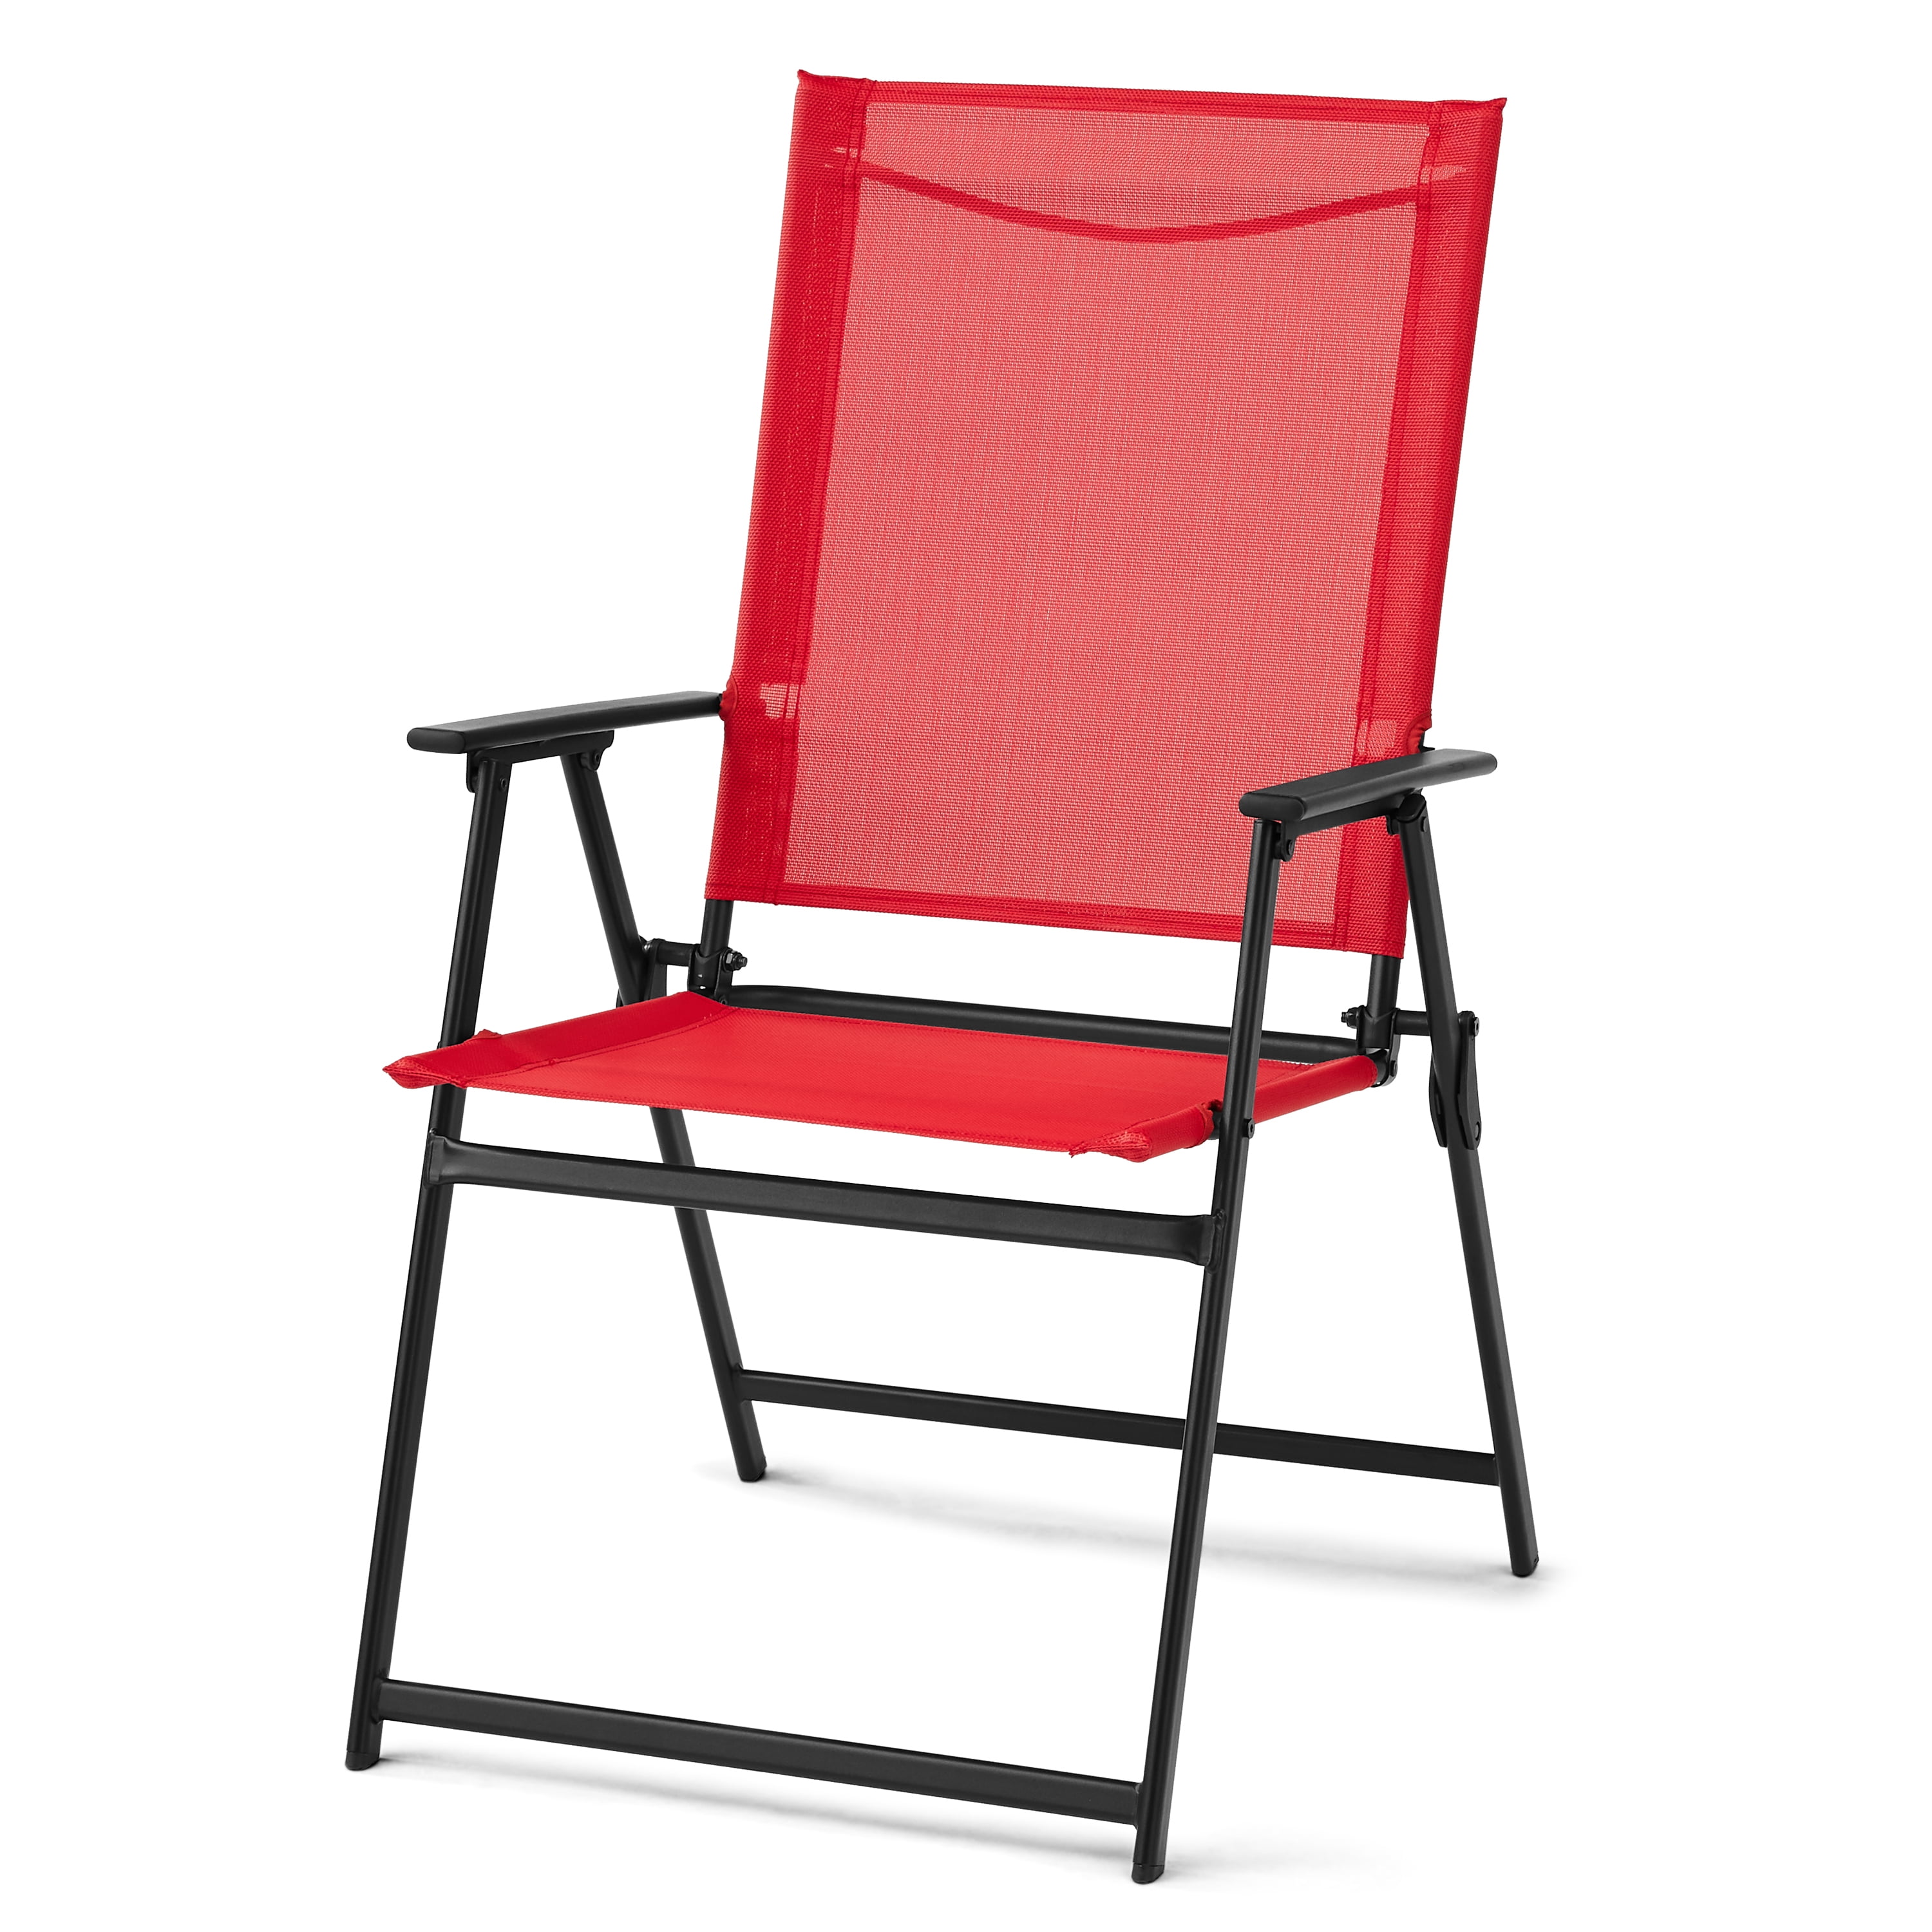 Mainstays Greyson Square Outdoor Patio, Red Foldable Patio Chairs